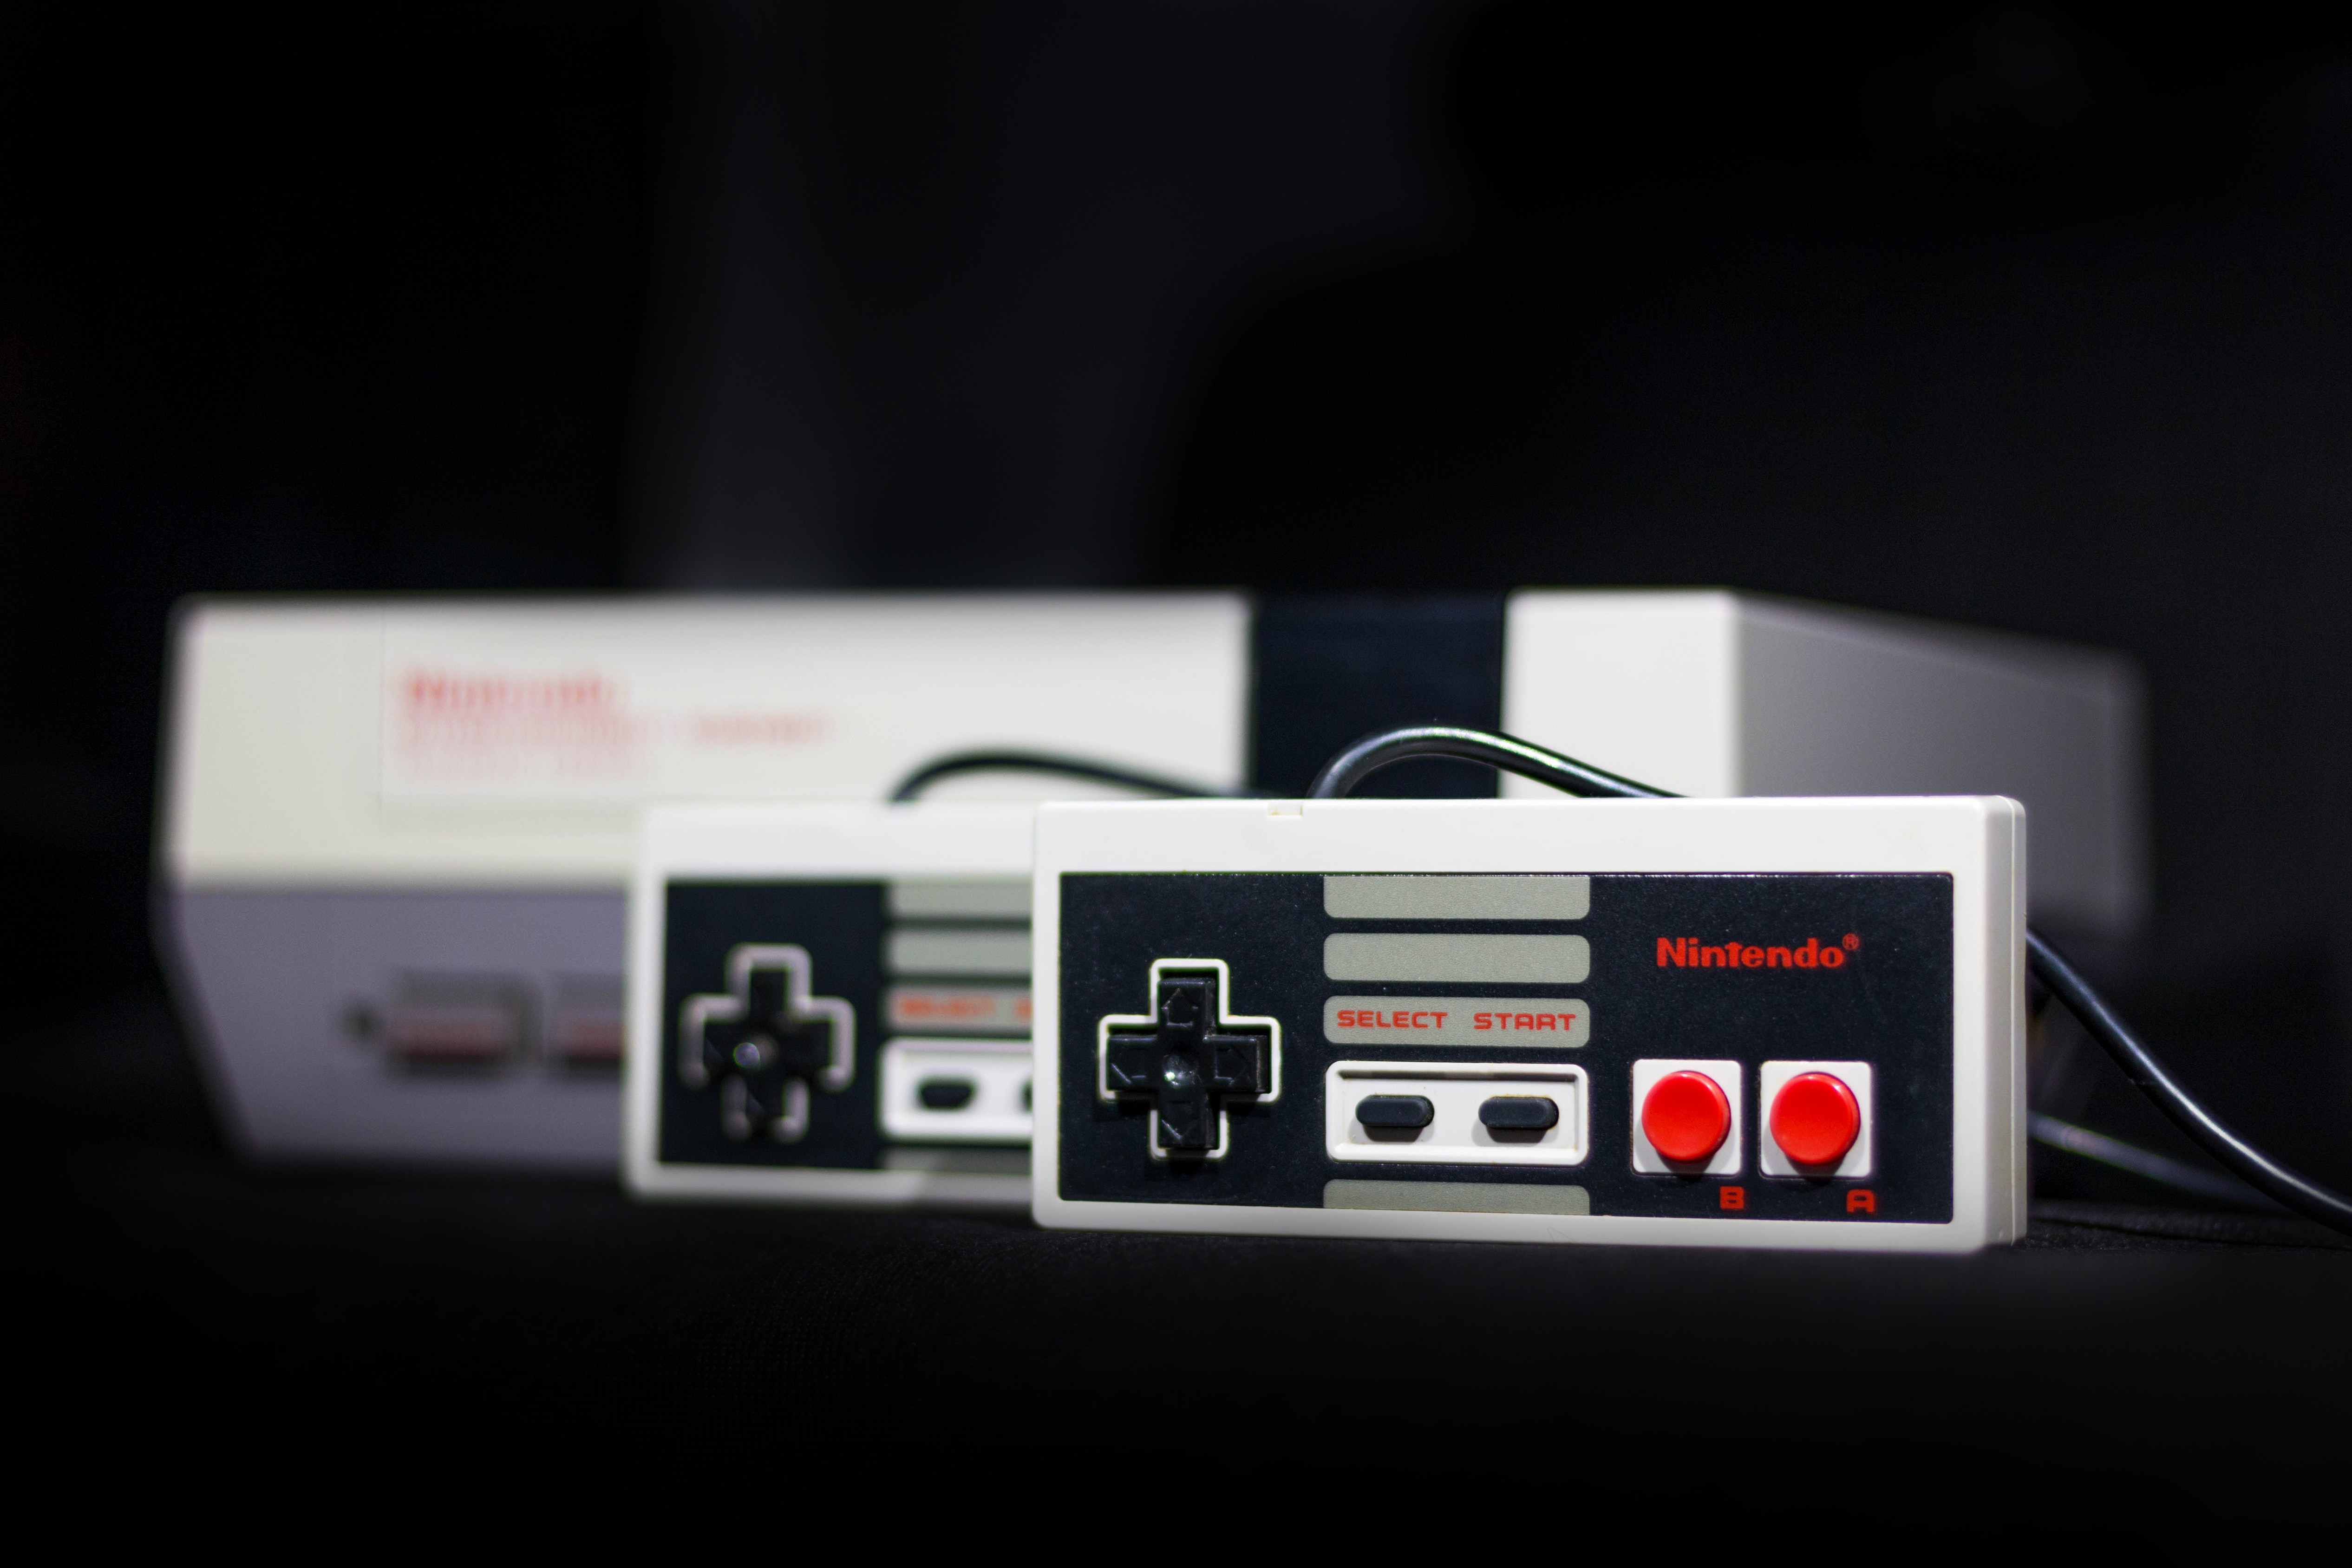 The designer behind the NES and SNES leaves Nintendo